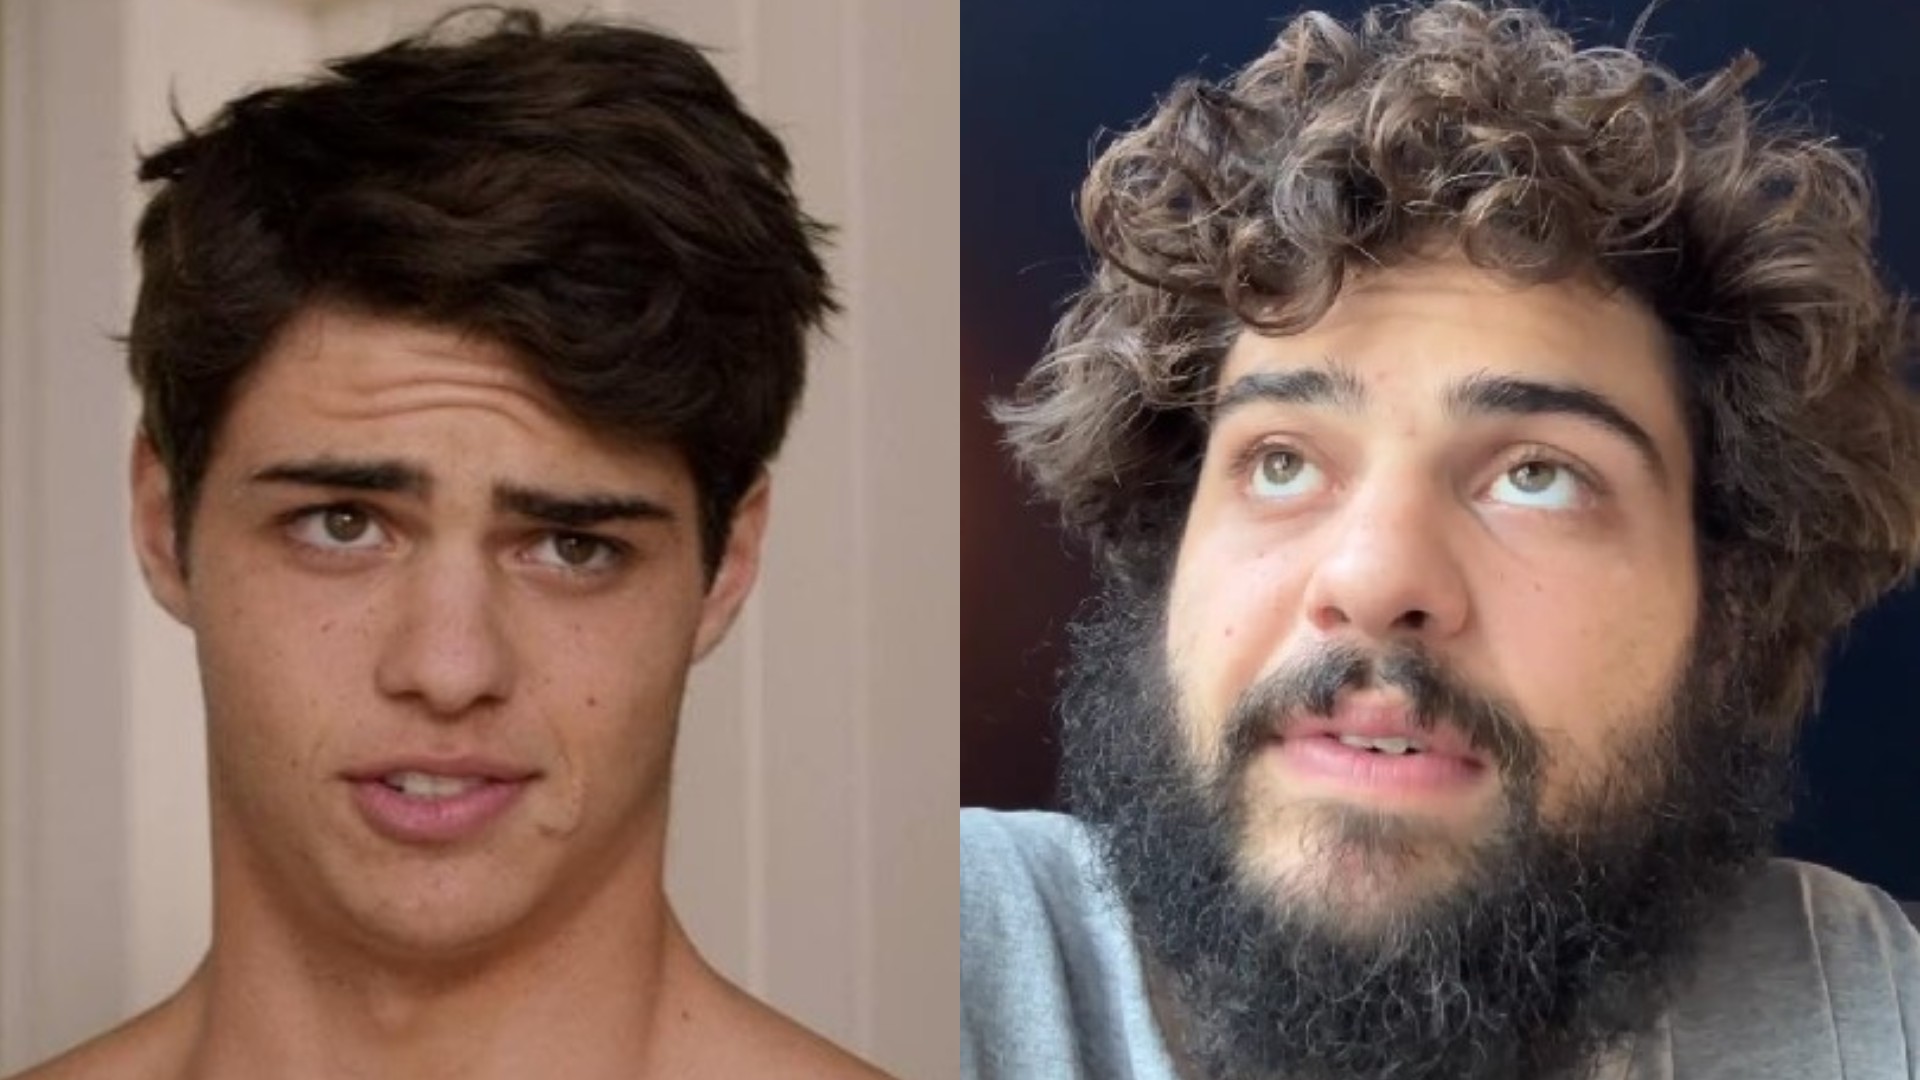 Noah Centineo surprises netizens when he appears in a new appearance ...